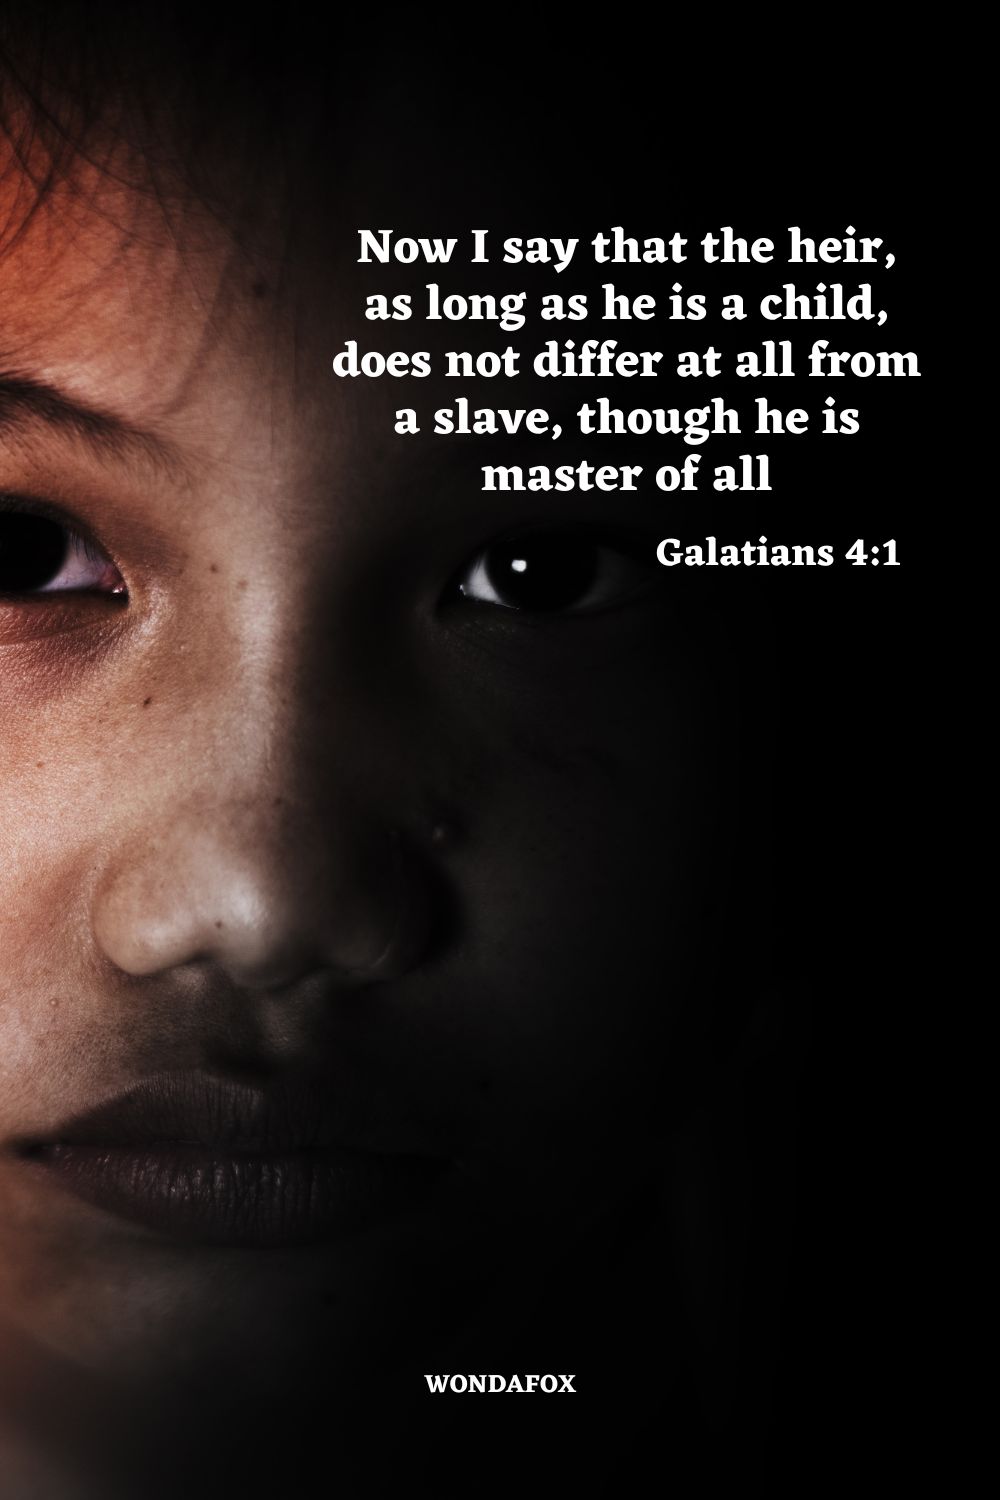 Now I say that the heir, as long as he is a child, does not differ at all from a slave, though he is master of all
Galatians 4:1